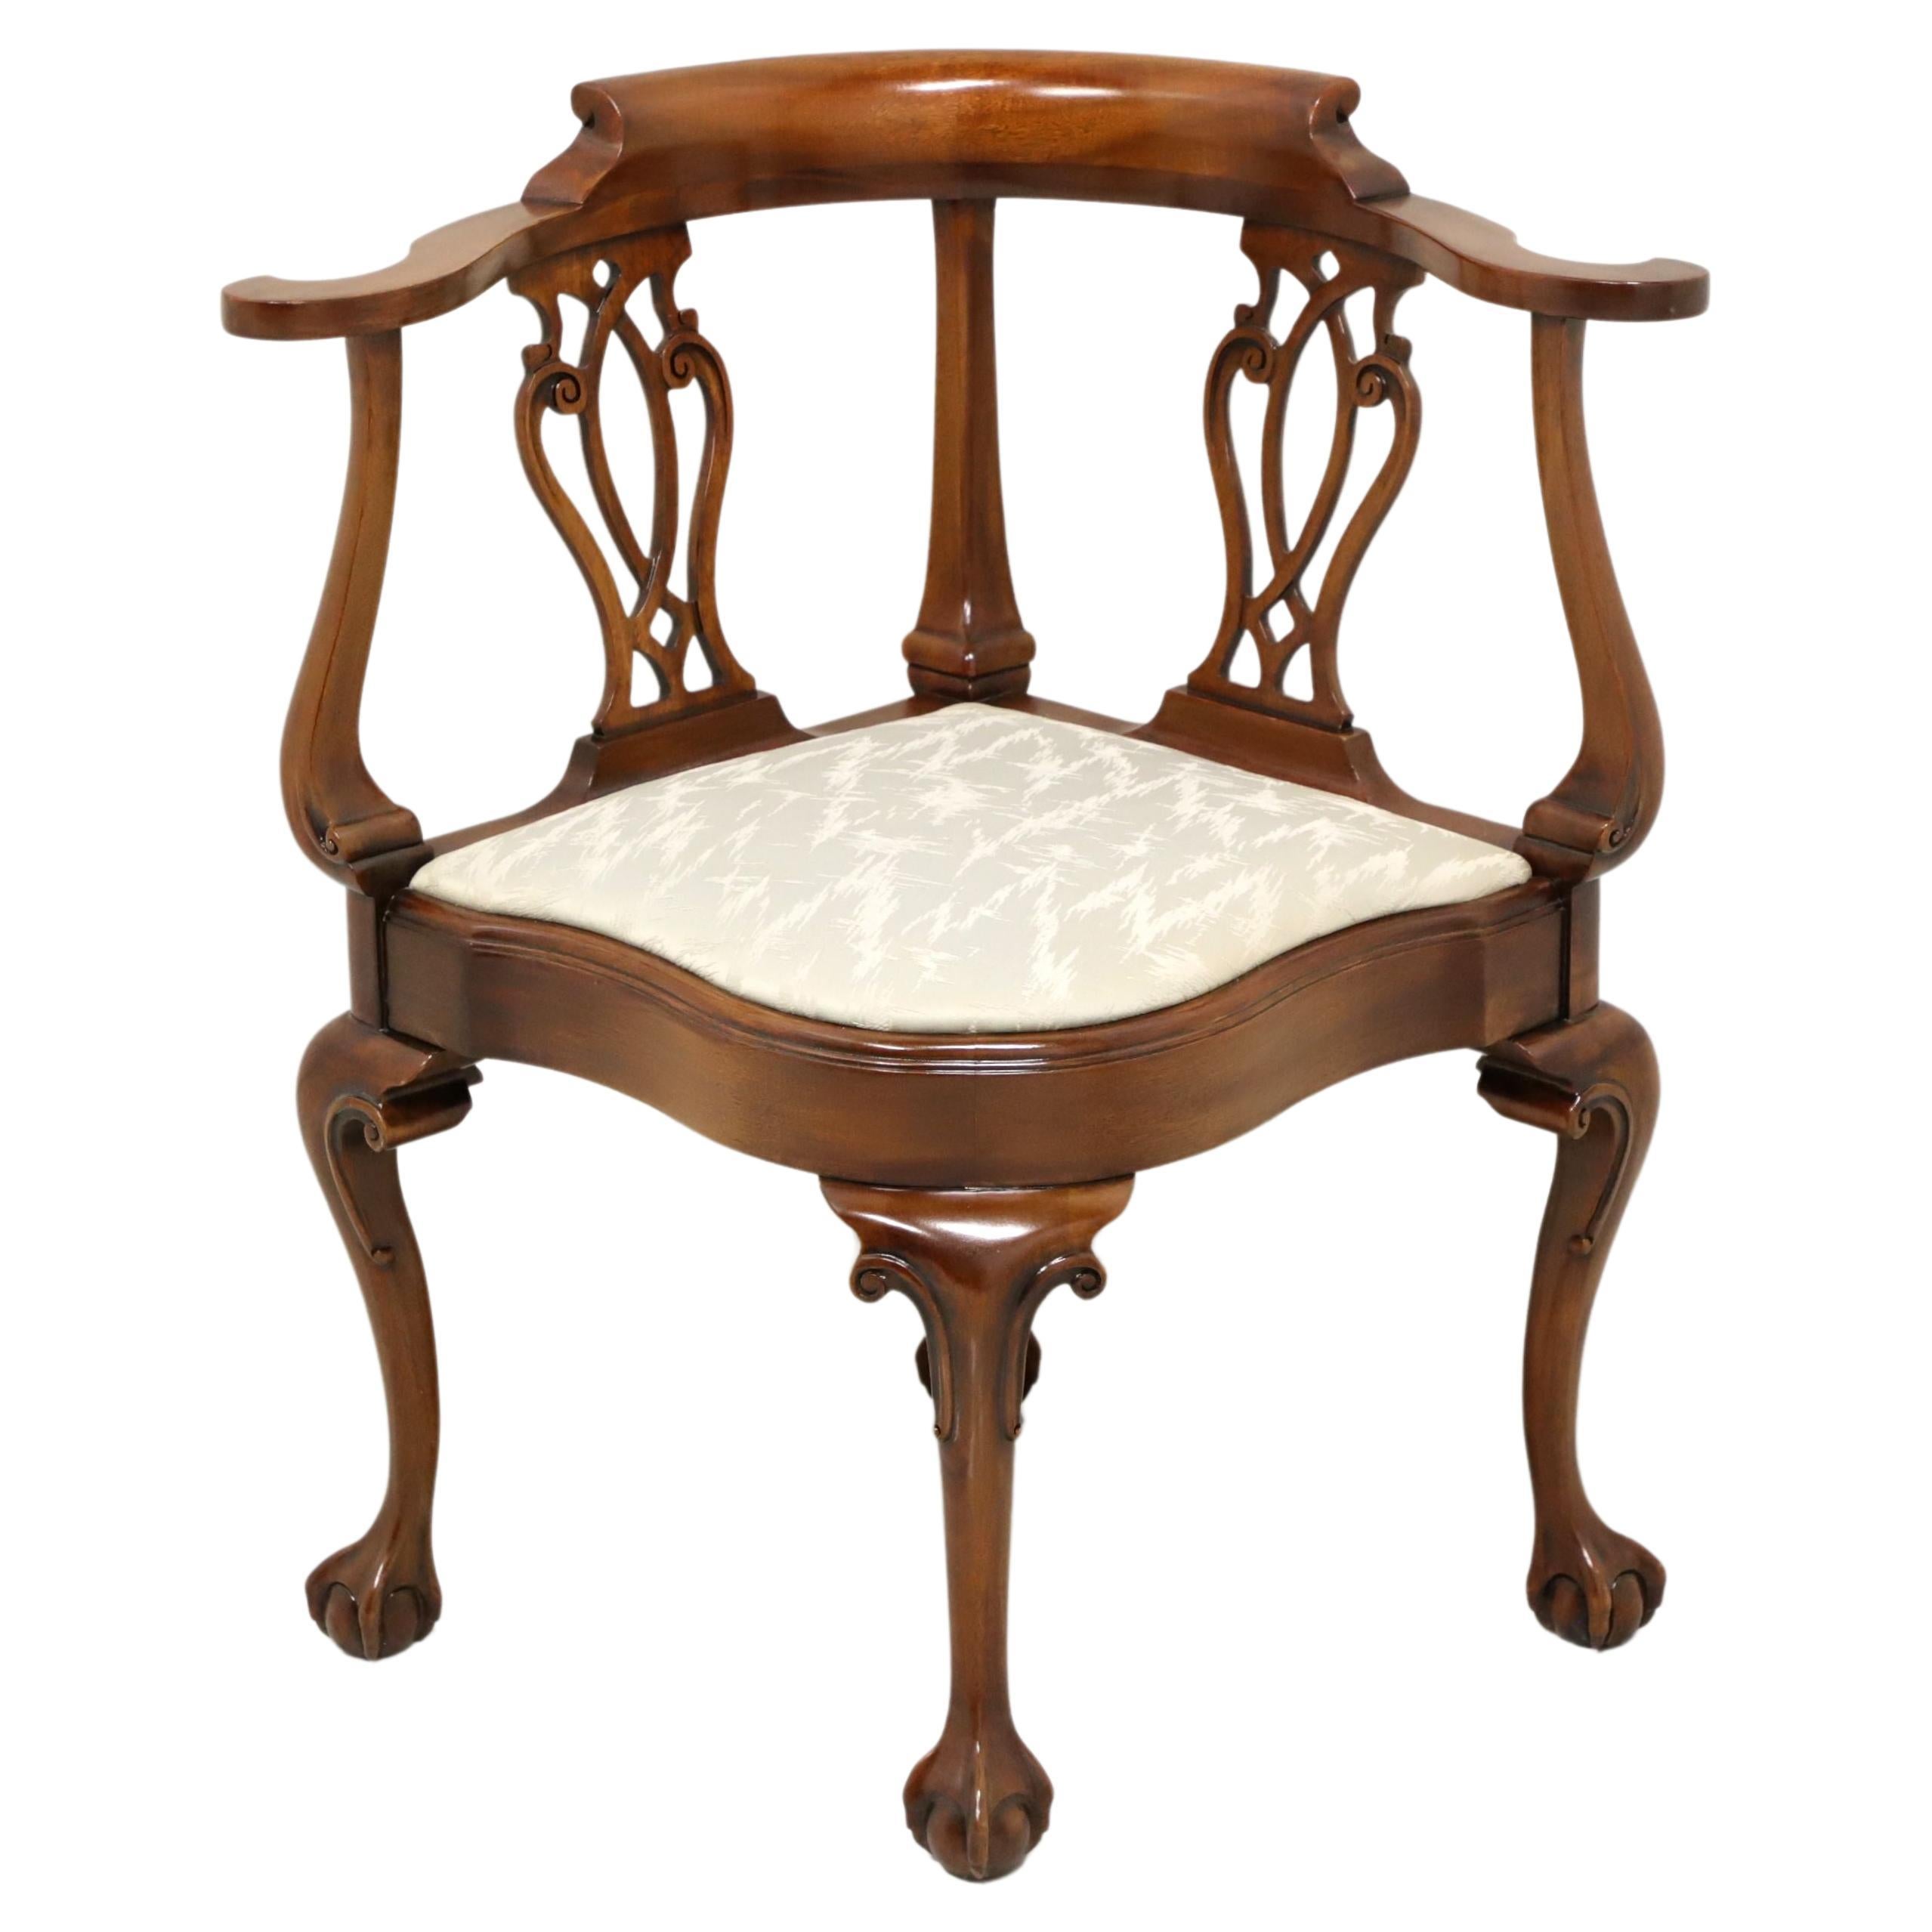 SOUTHWOOD Mahogany Chippendale Style Corner Chair